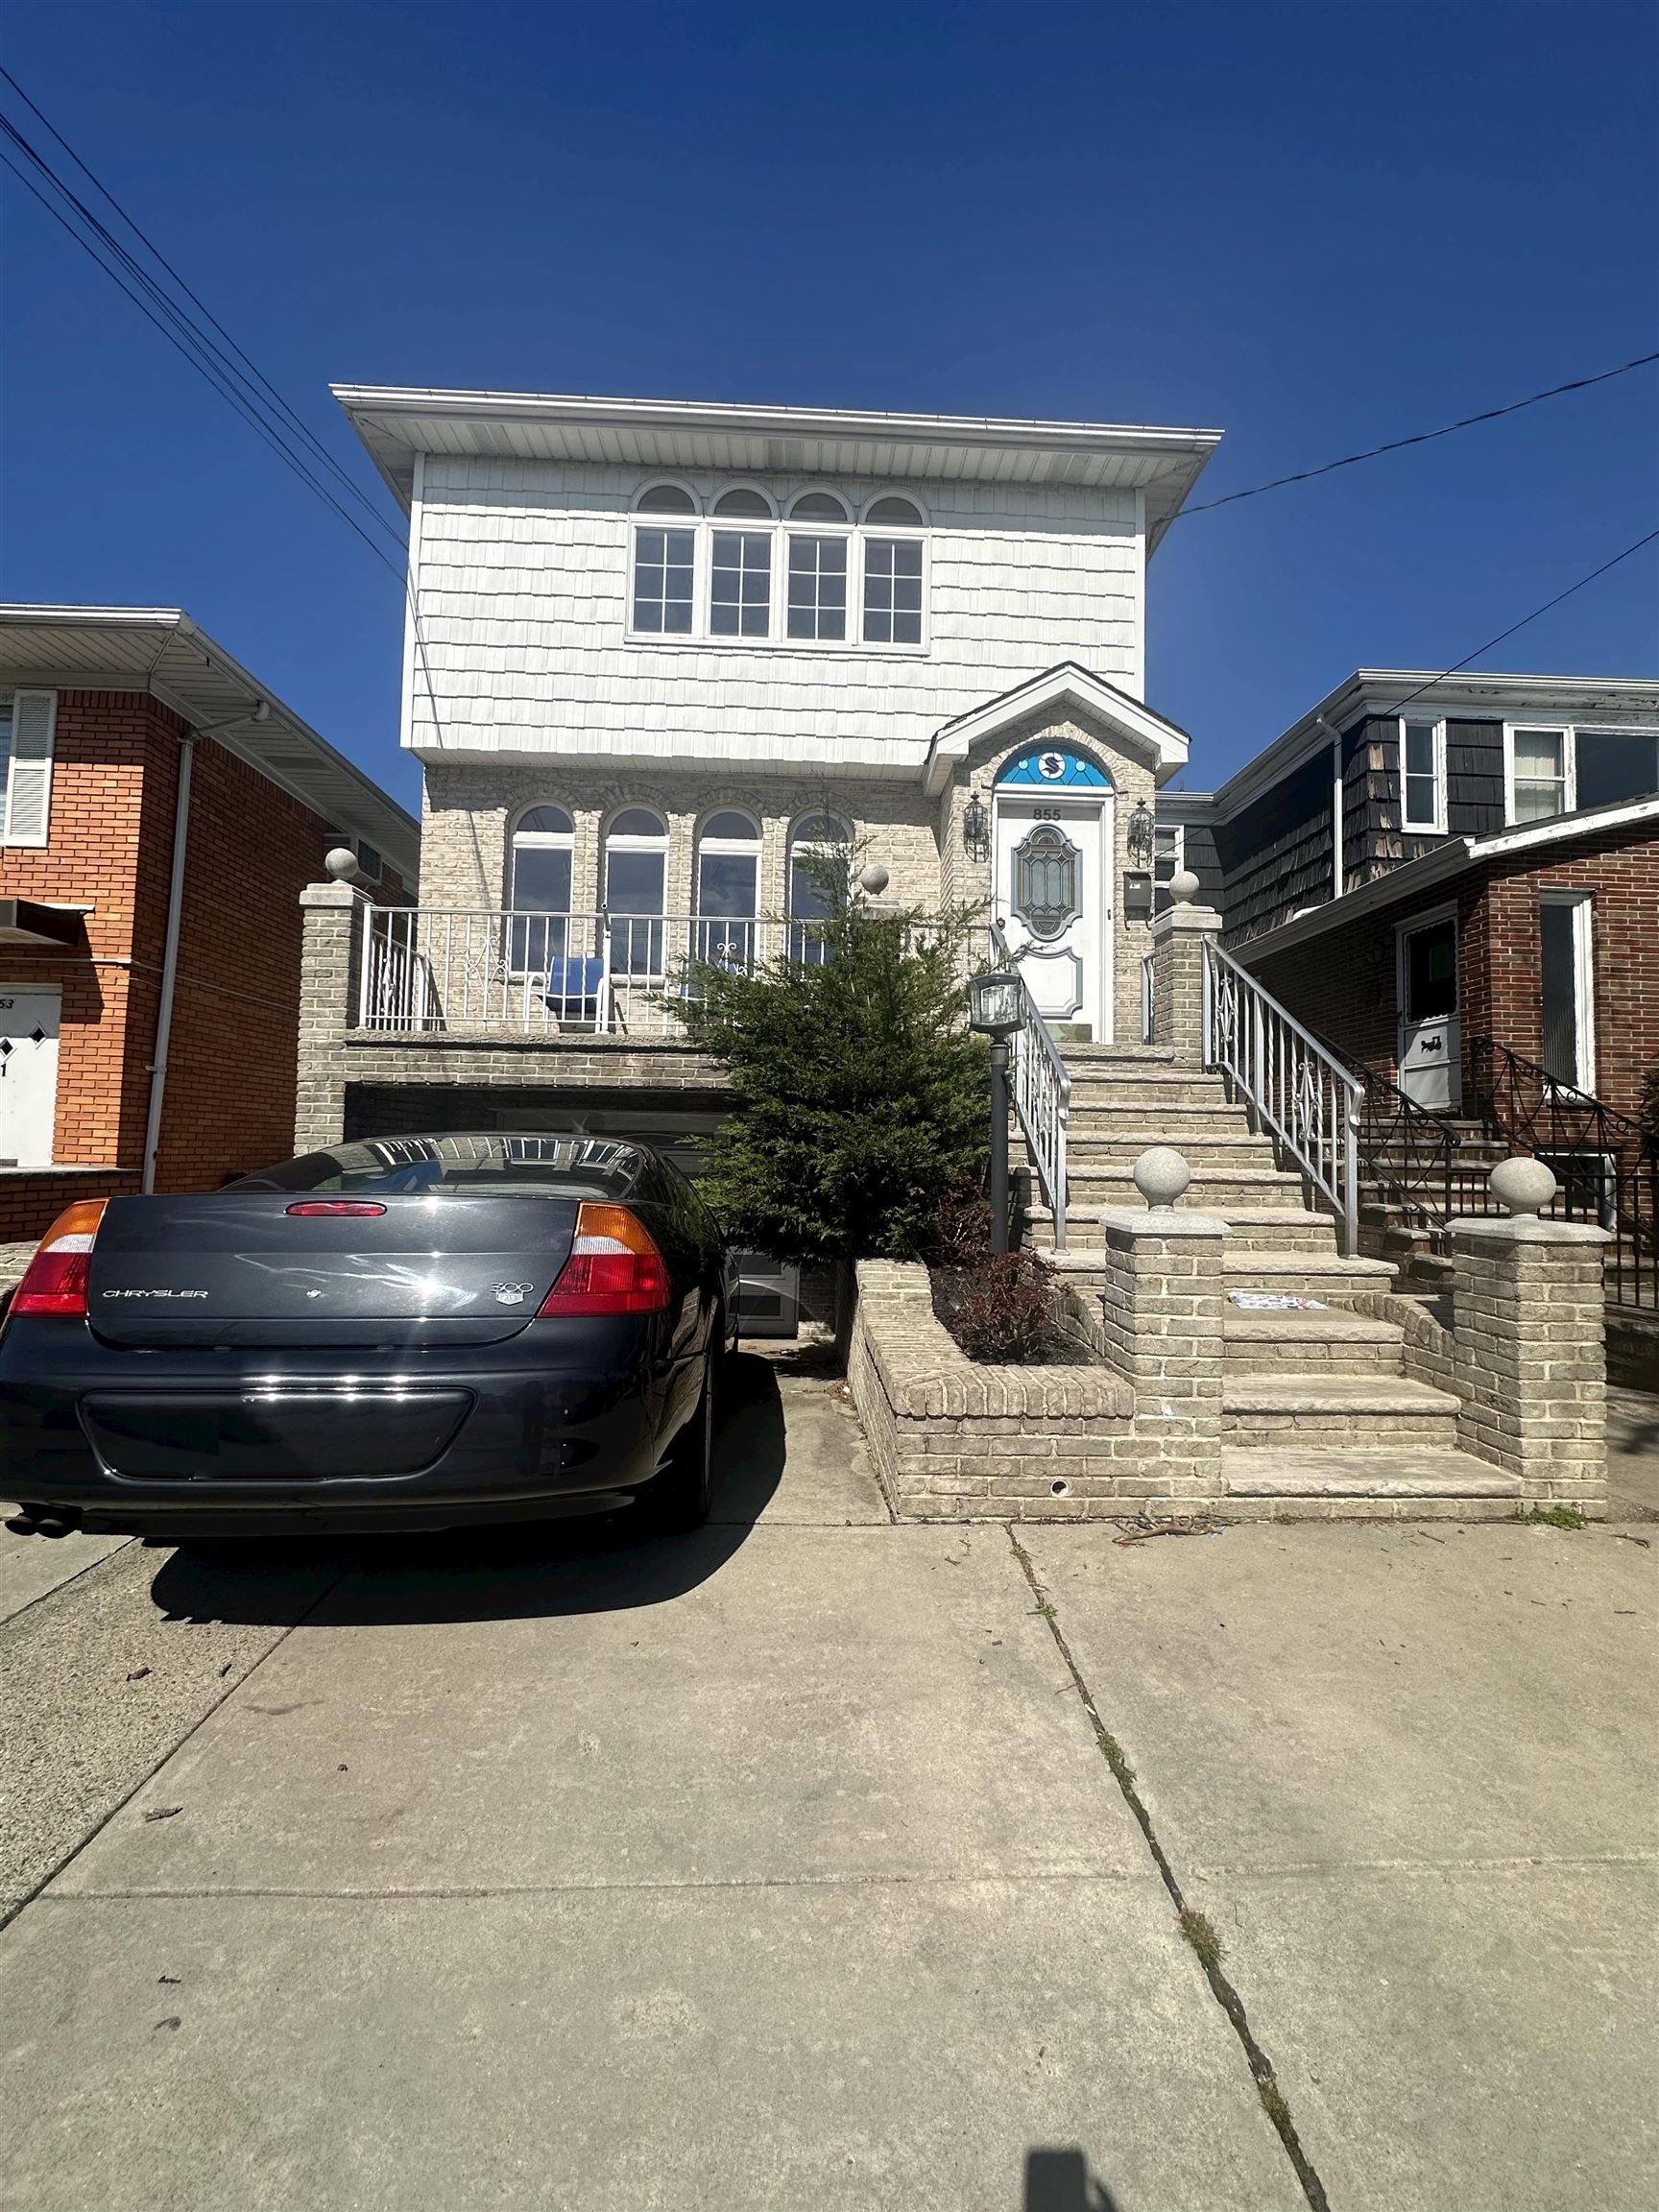 # 240006006 - For Rent in Bayonne NJ